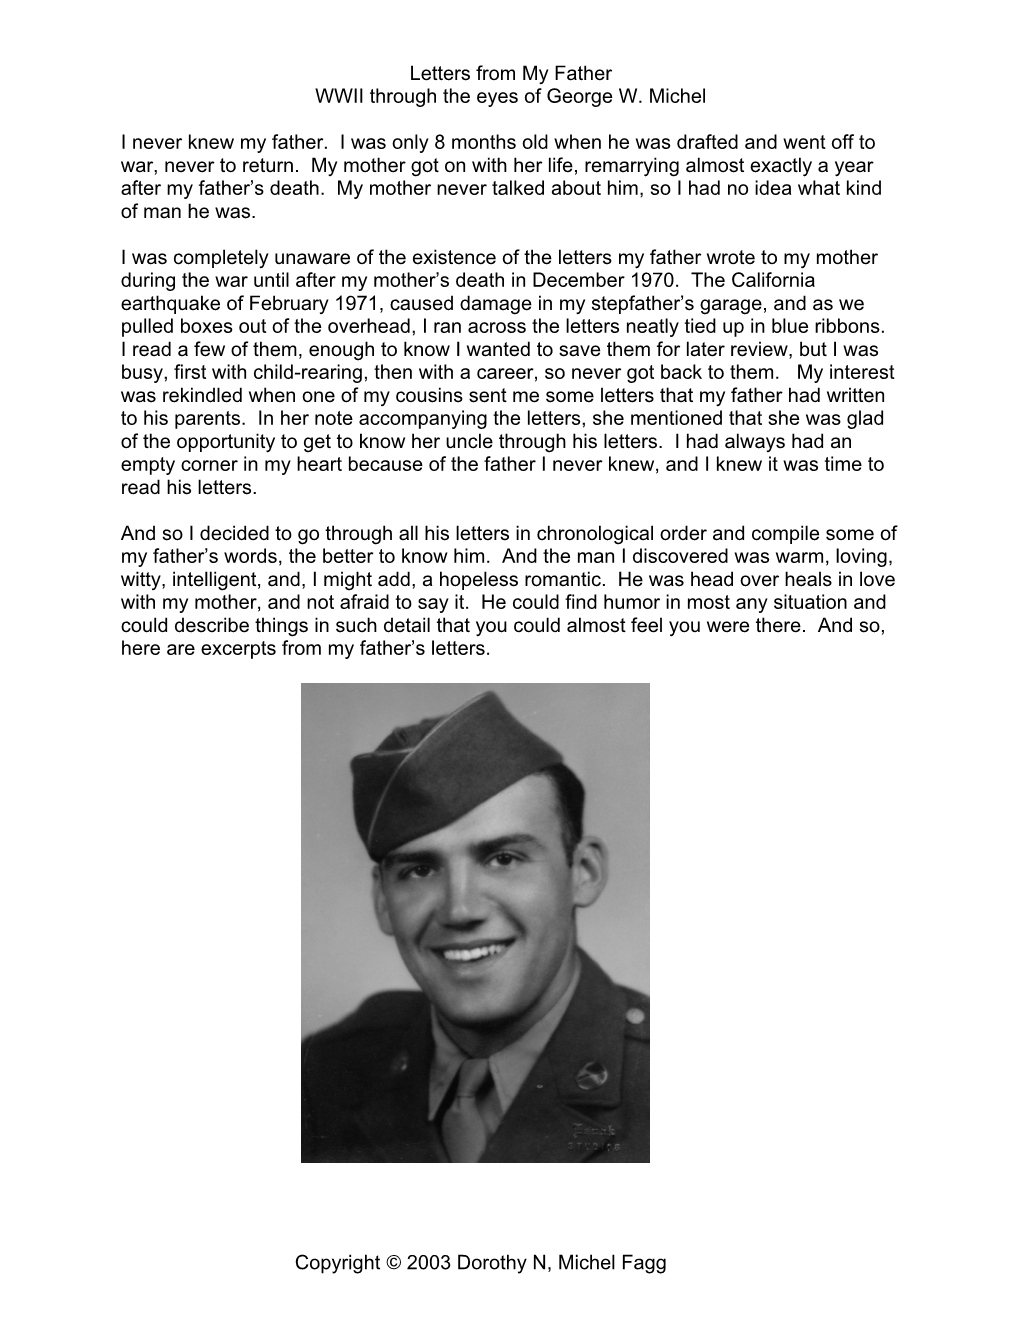 Letters from My Father WWII Through the Eyes of George W